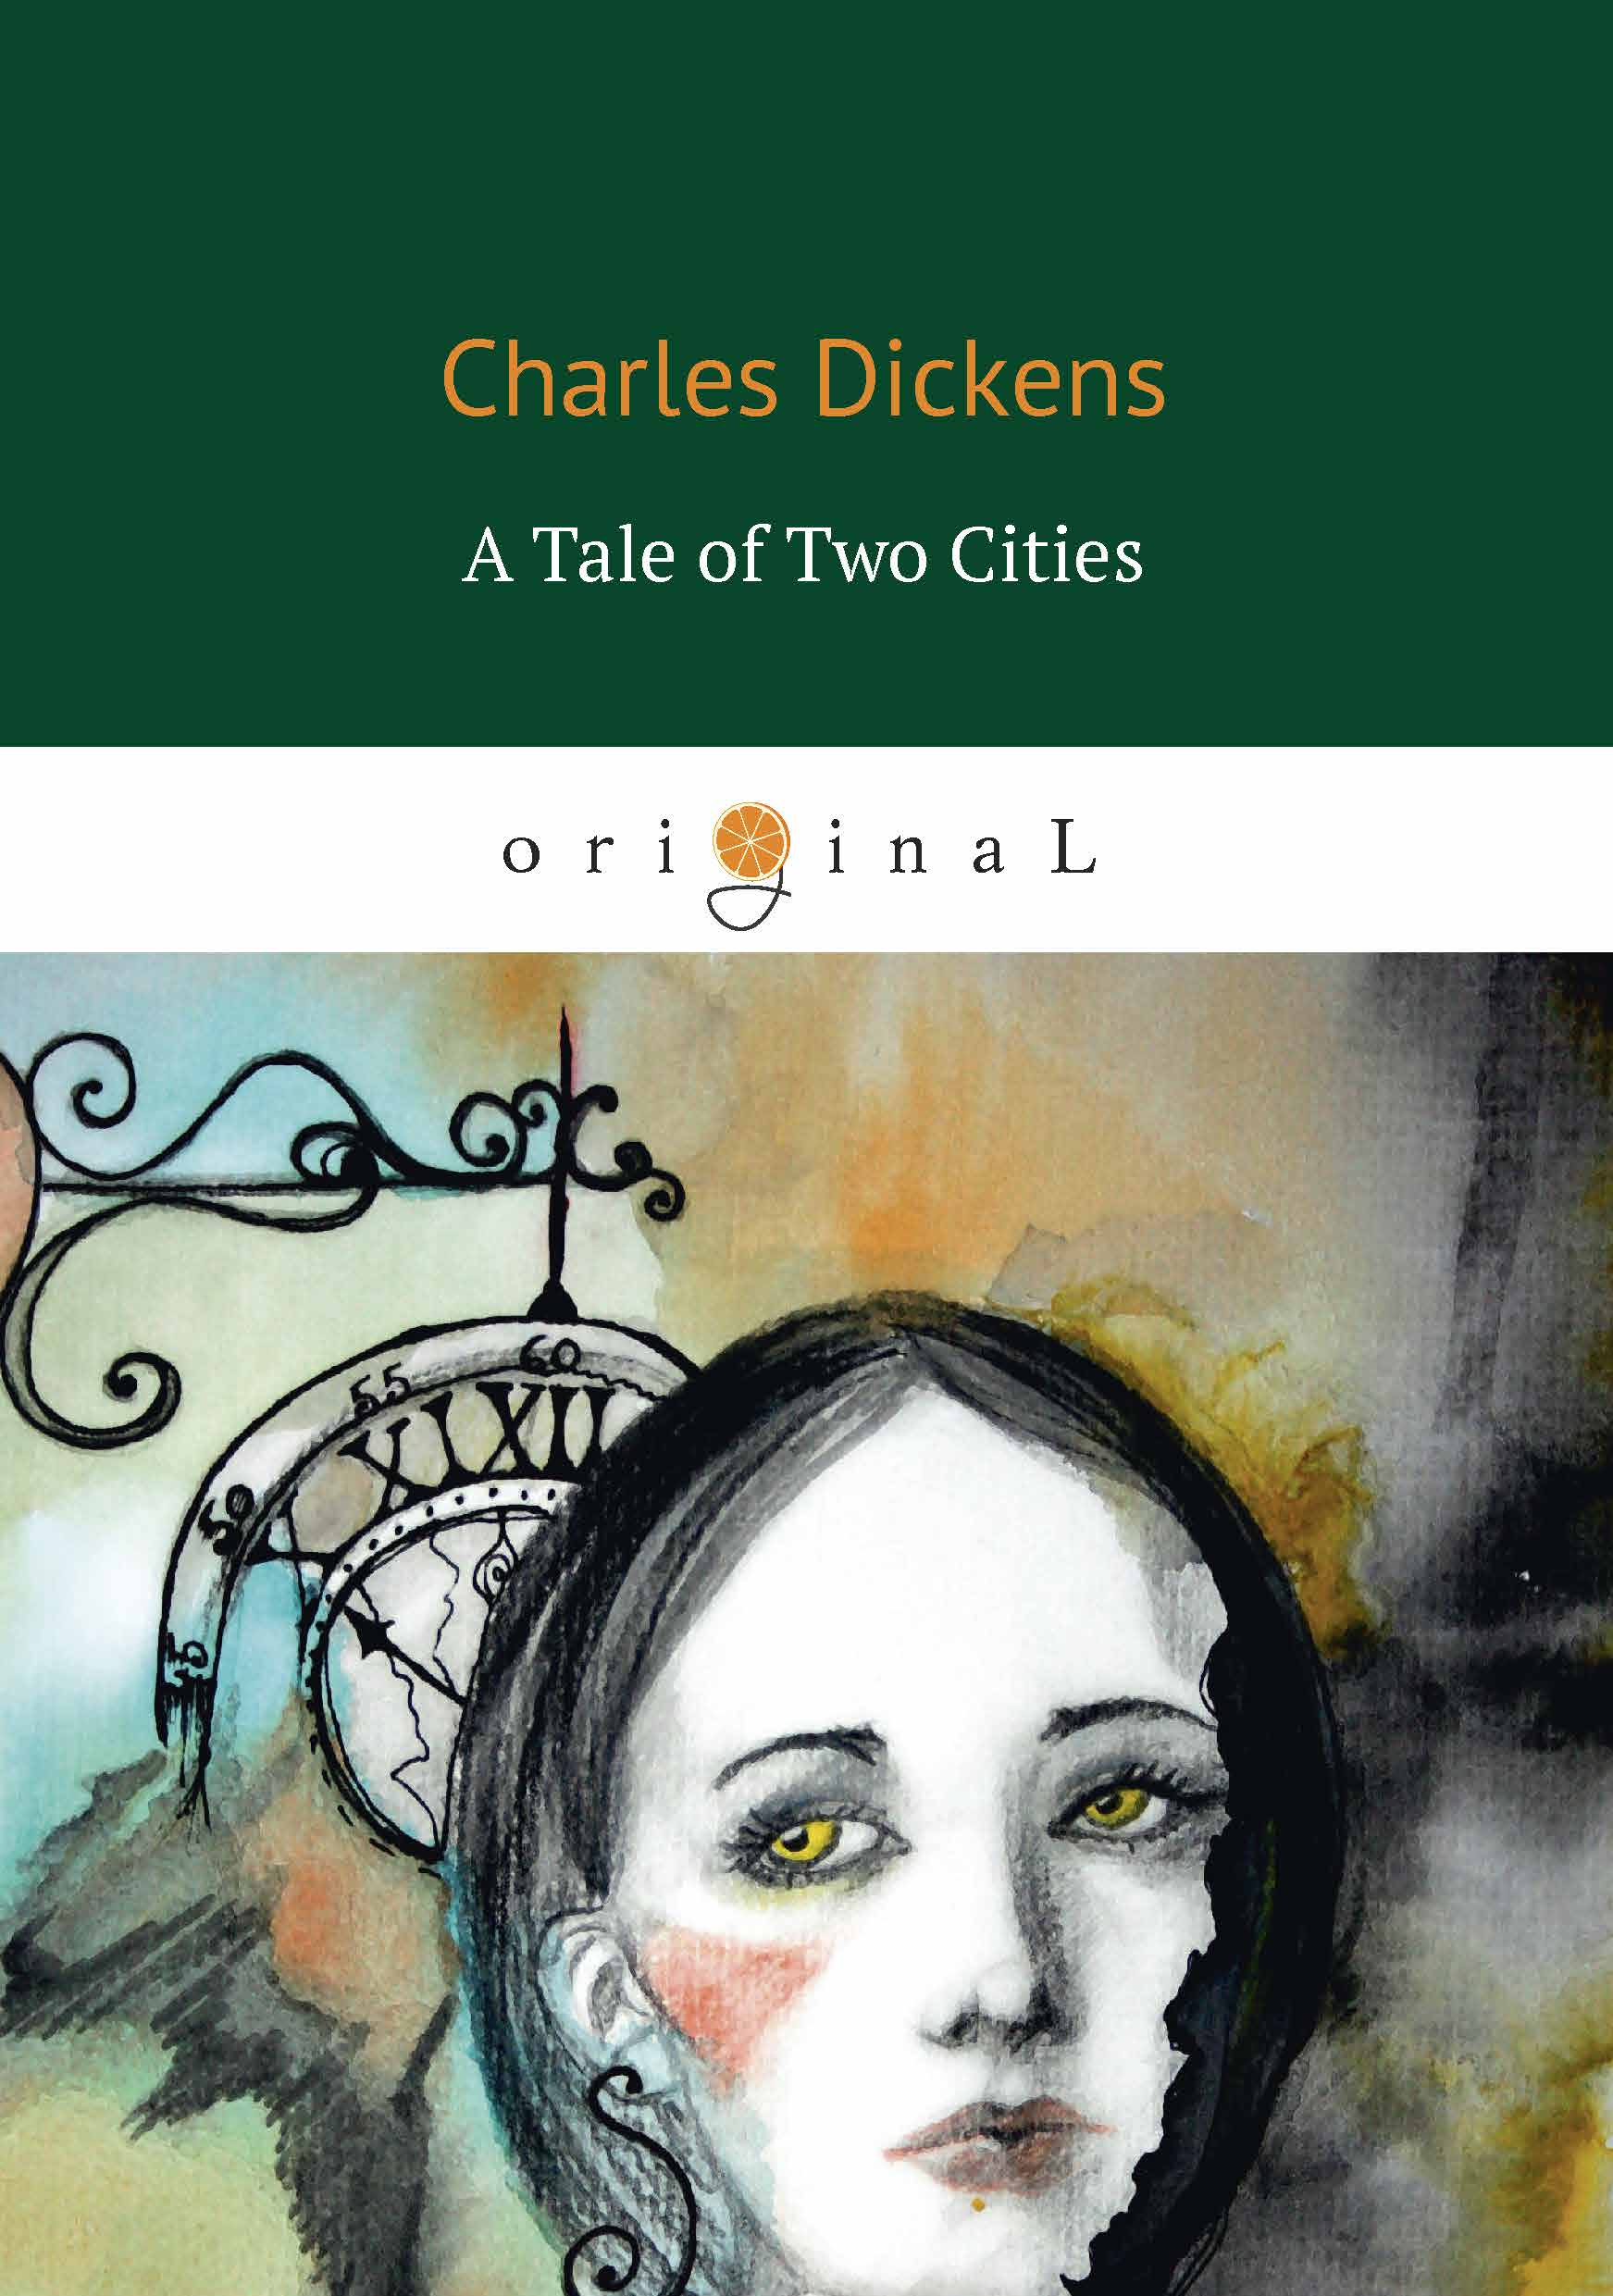 A Tale of Two Cities. Charles Dickens